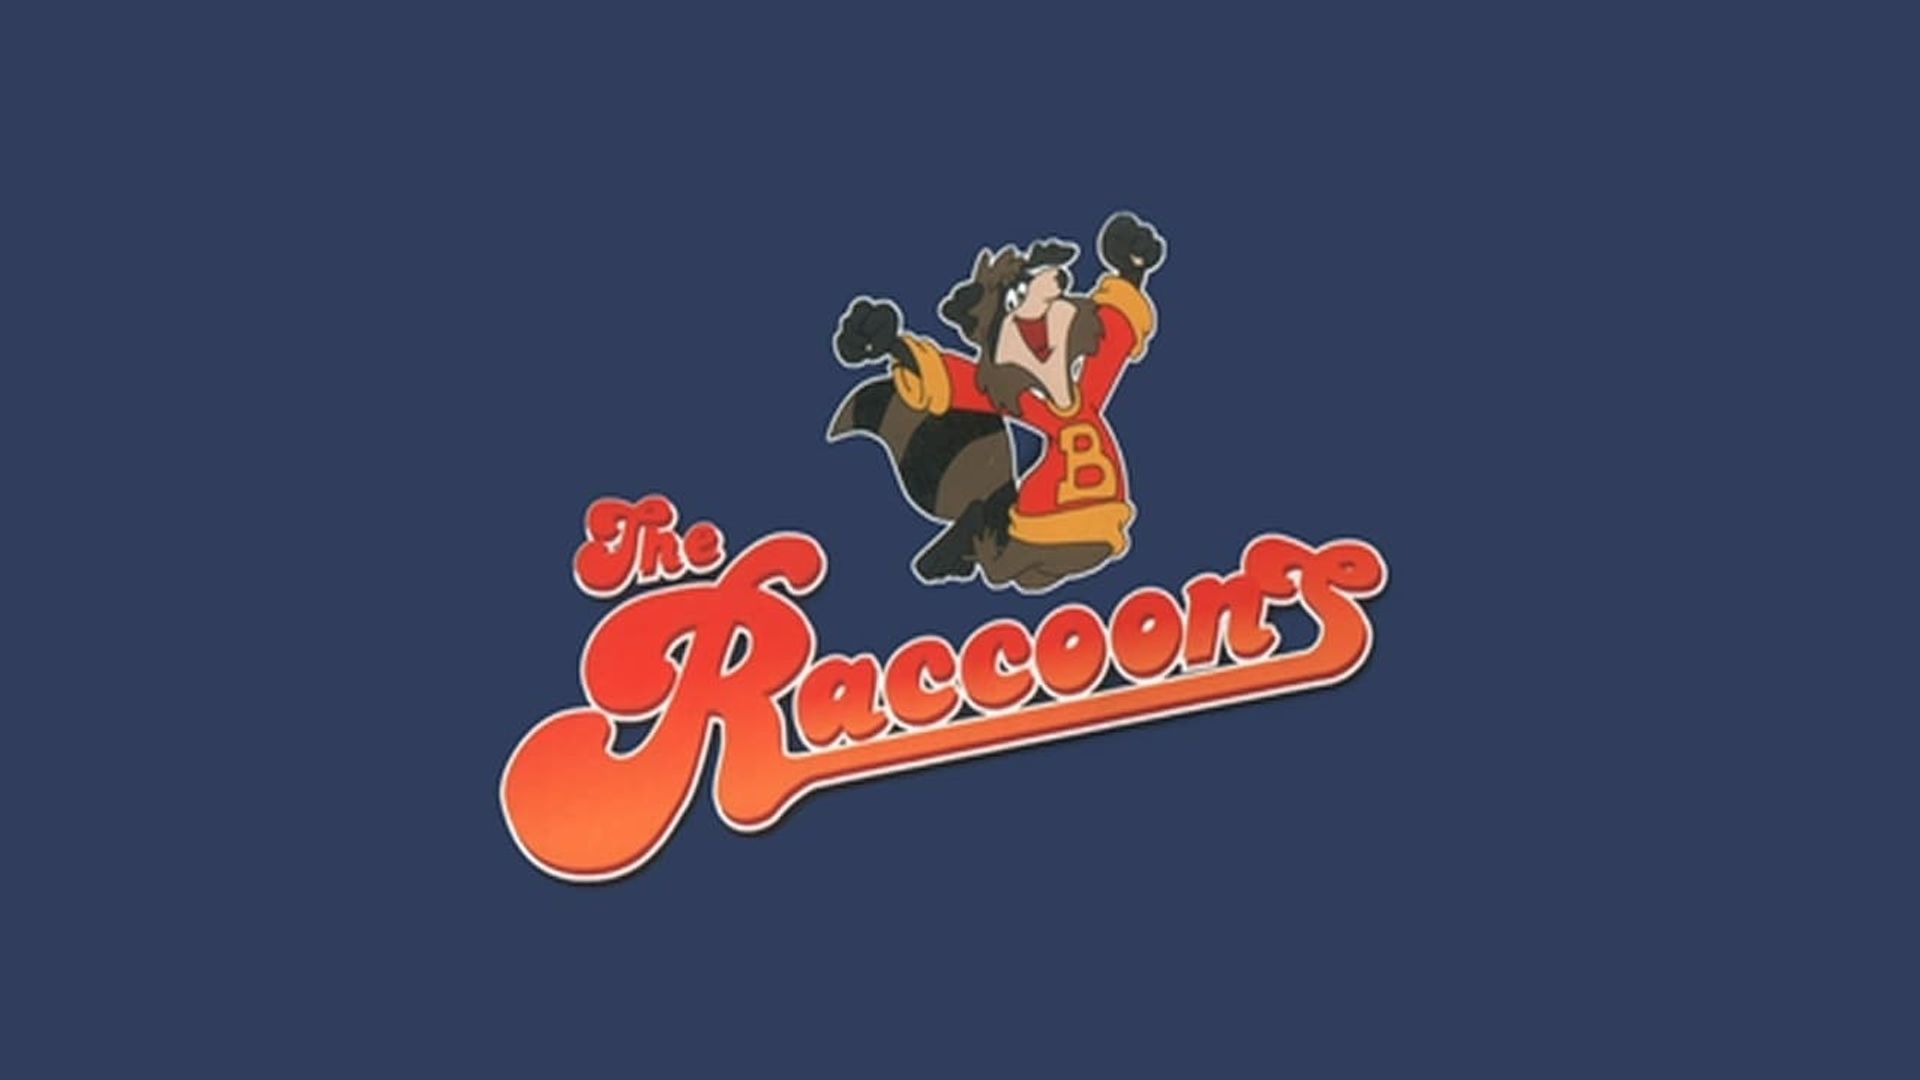 The Raccoons background